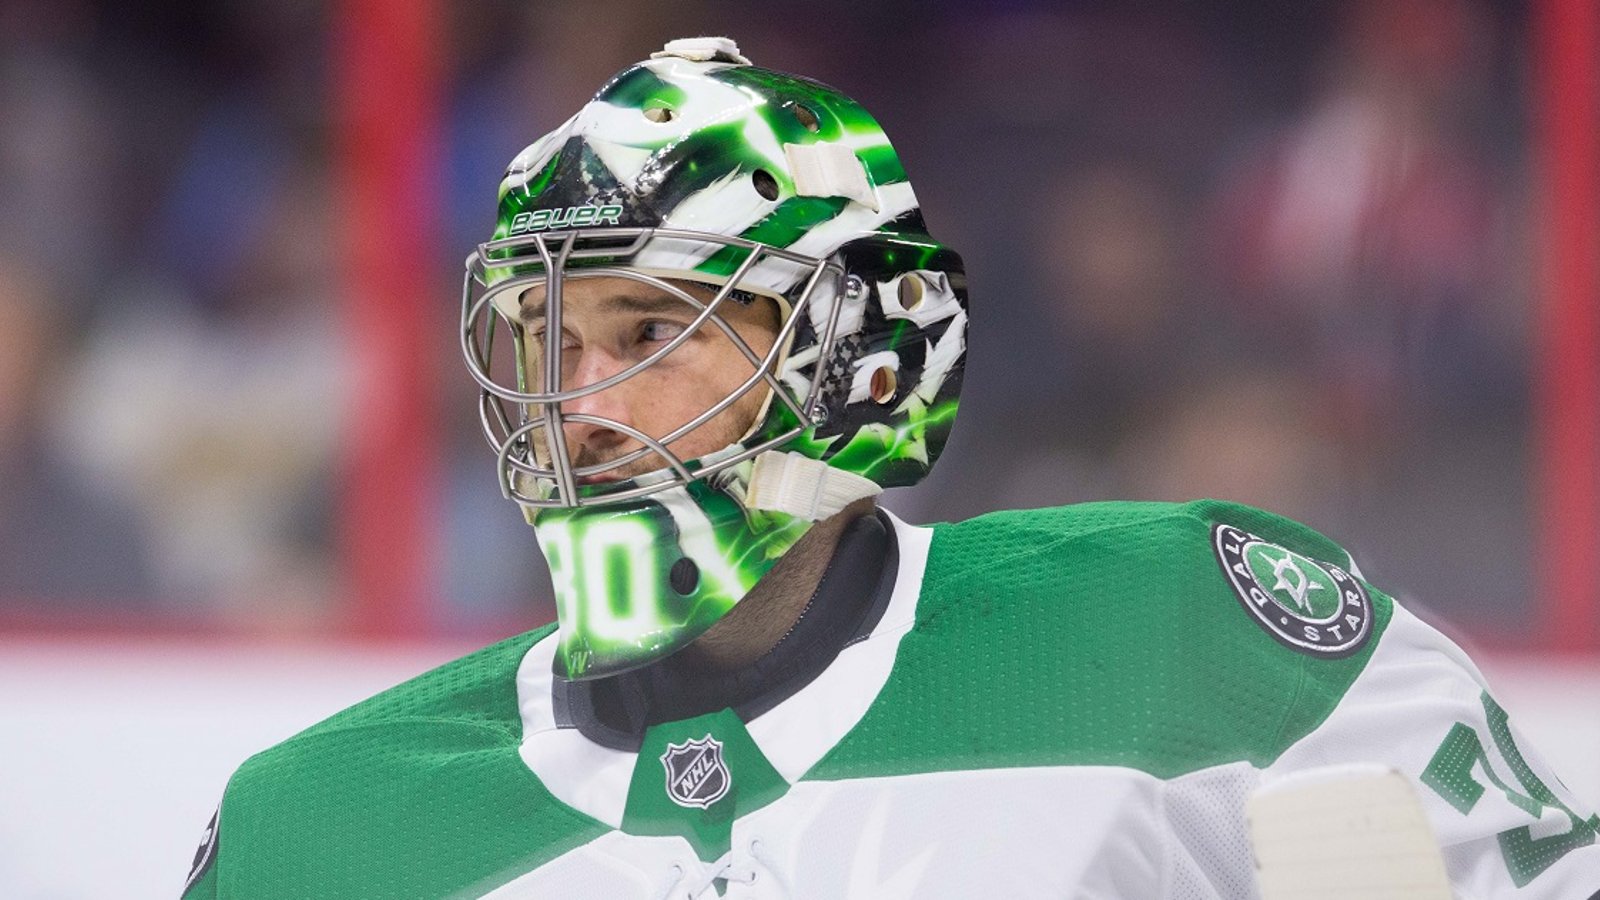 Ben Bishop calls out his own team, but buries the Red Wings in the process.